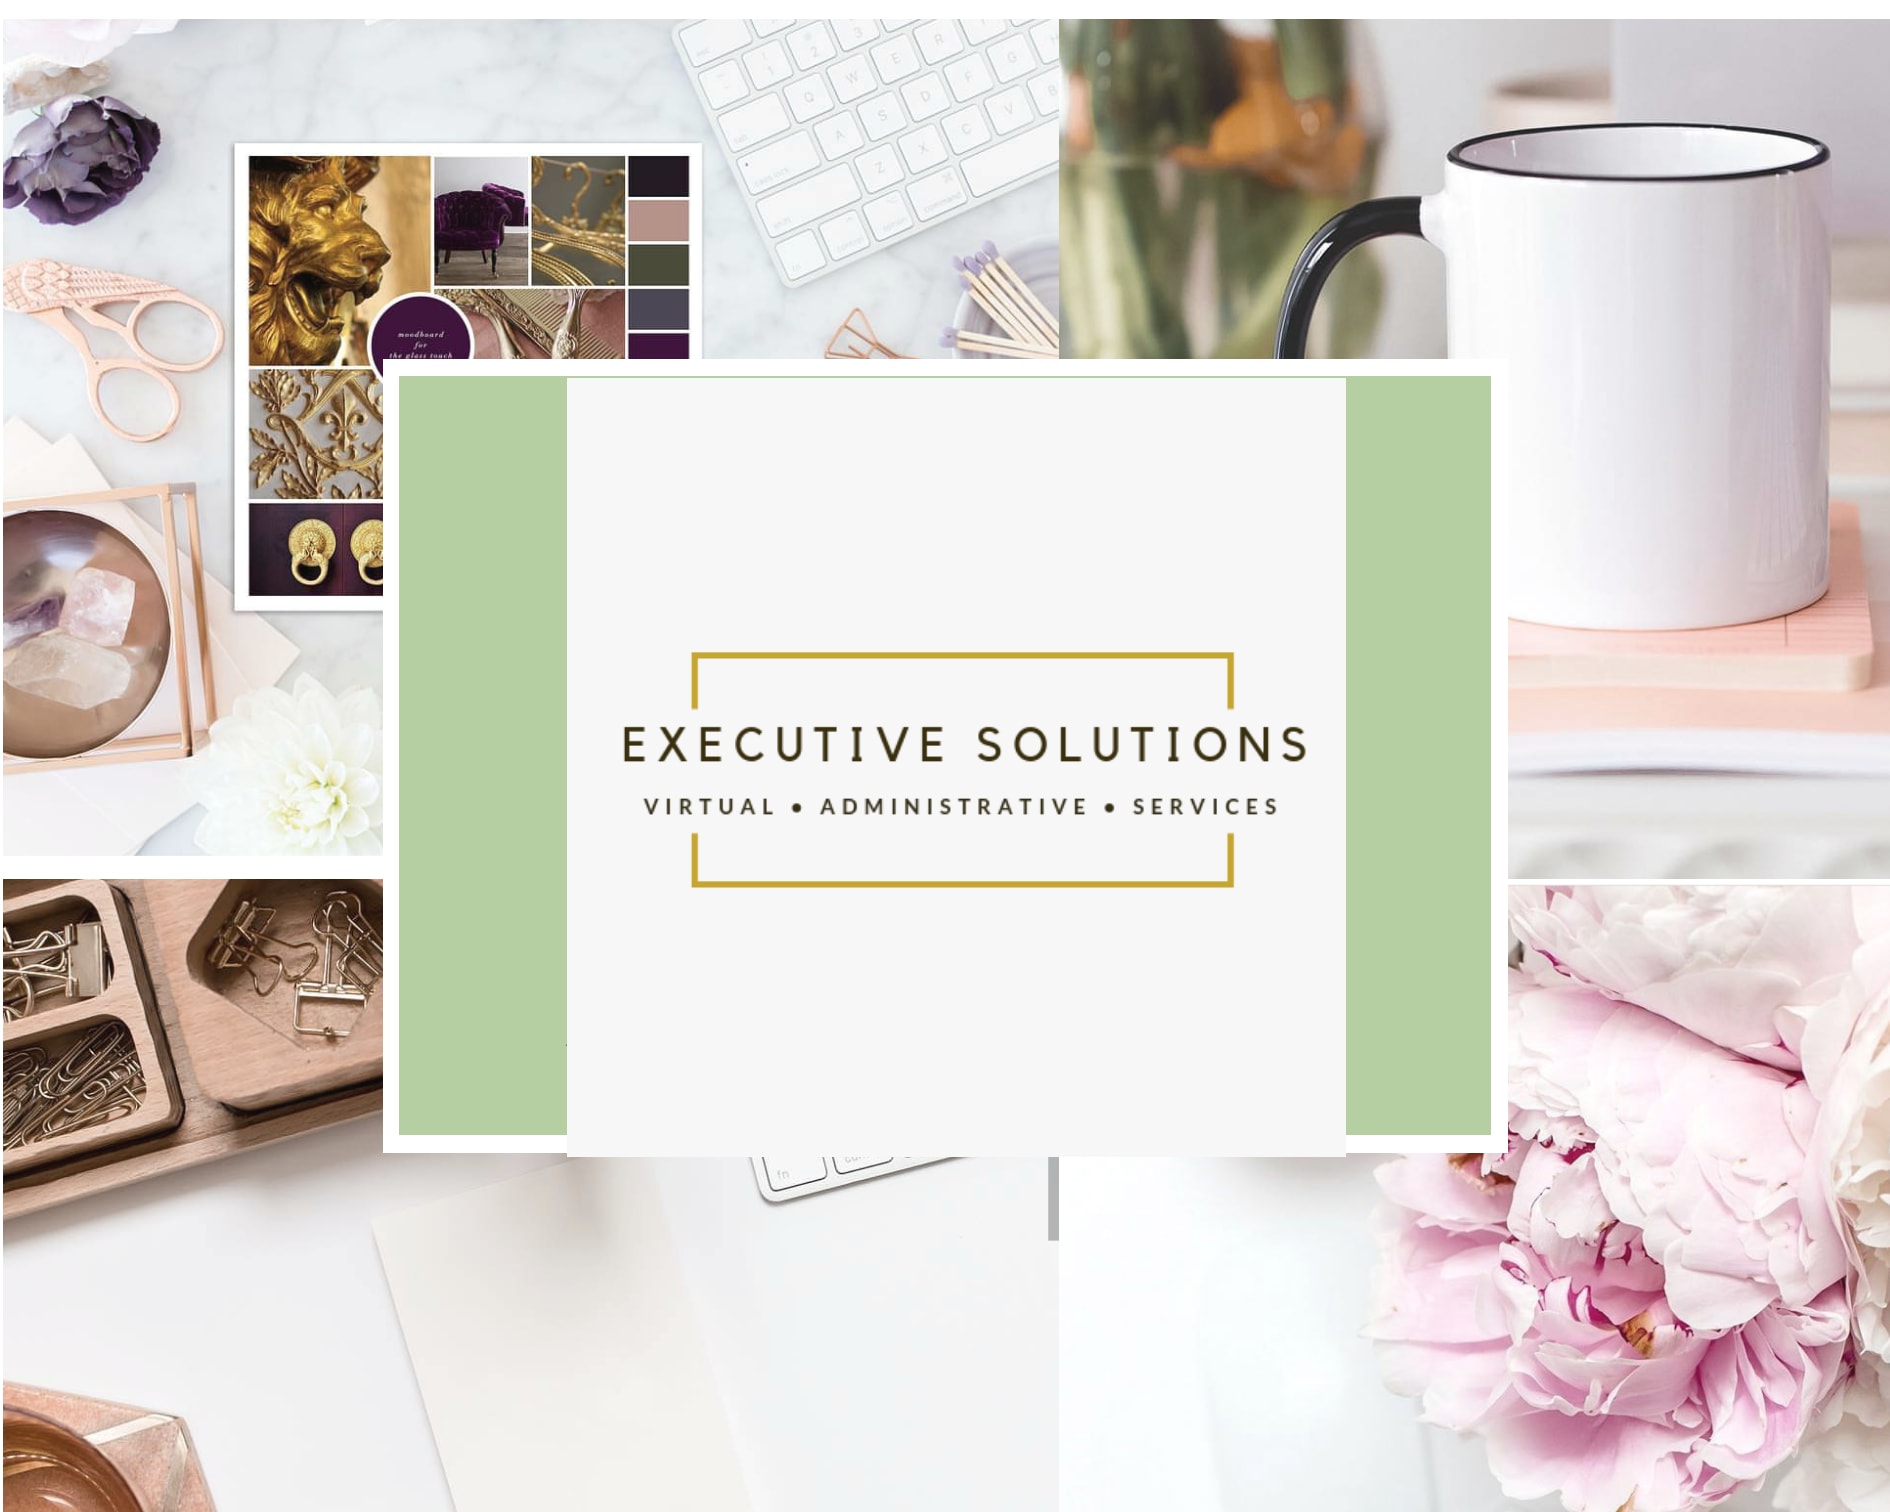 Executive Solutions Virtual Administrative Services